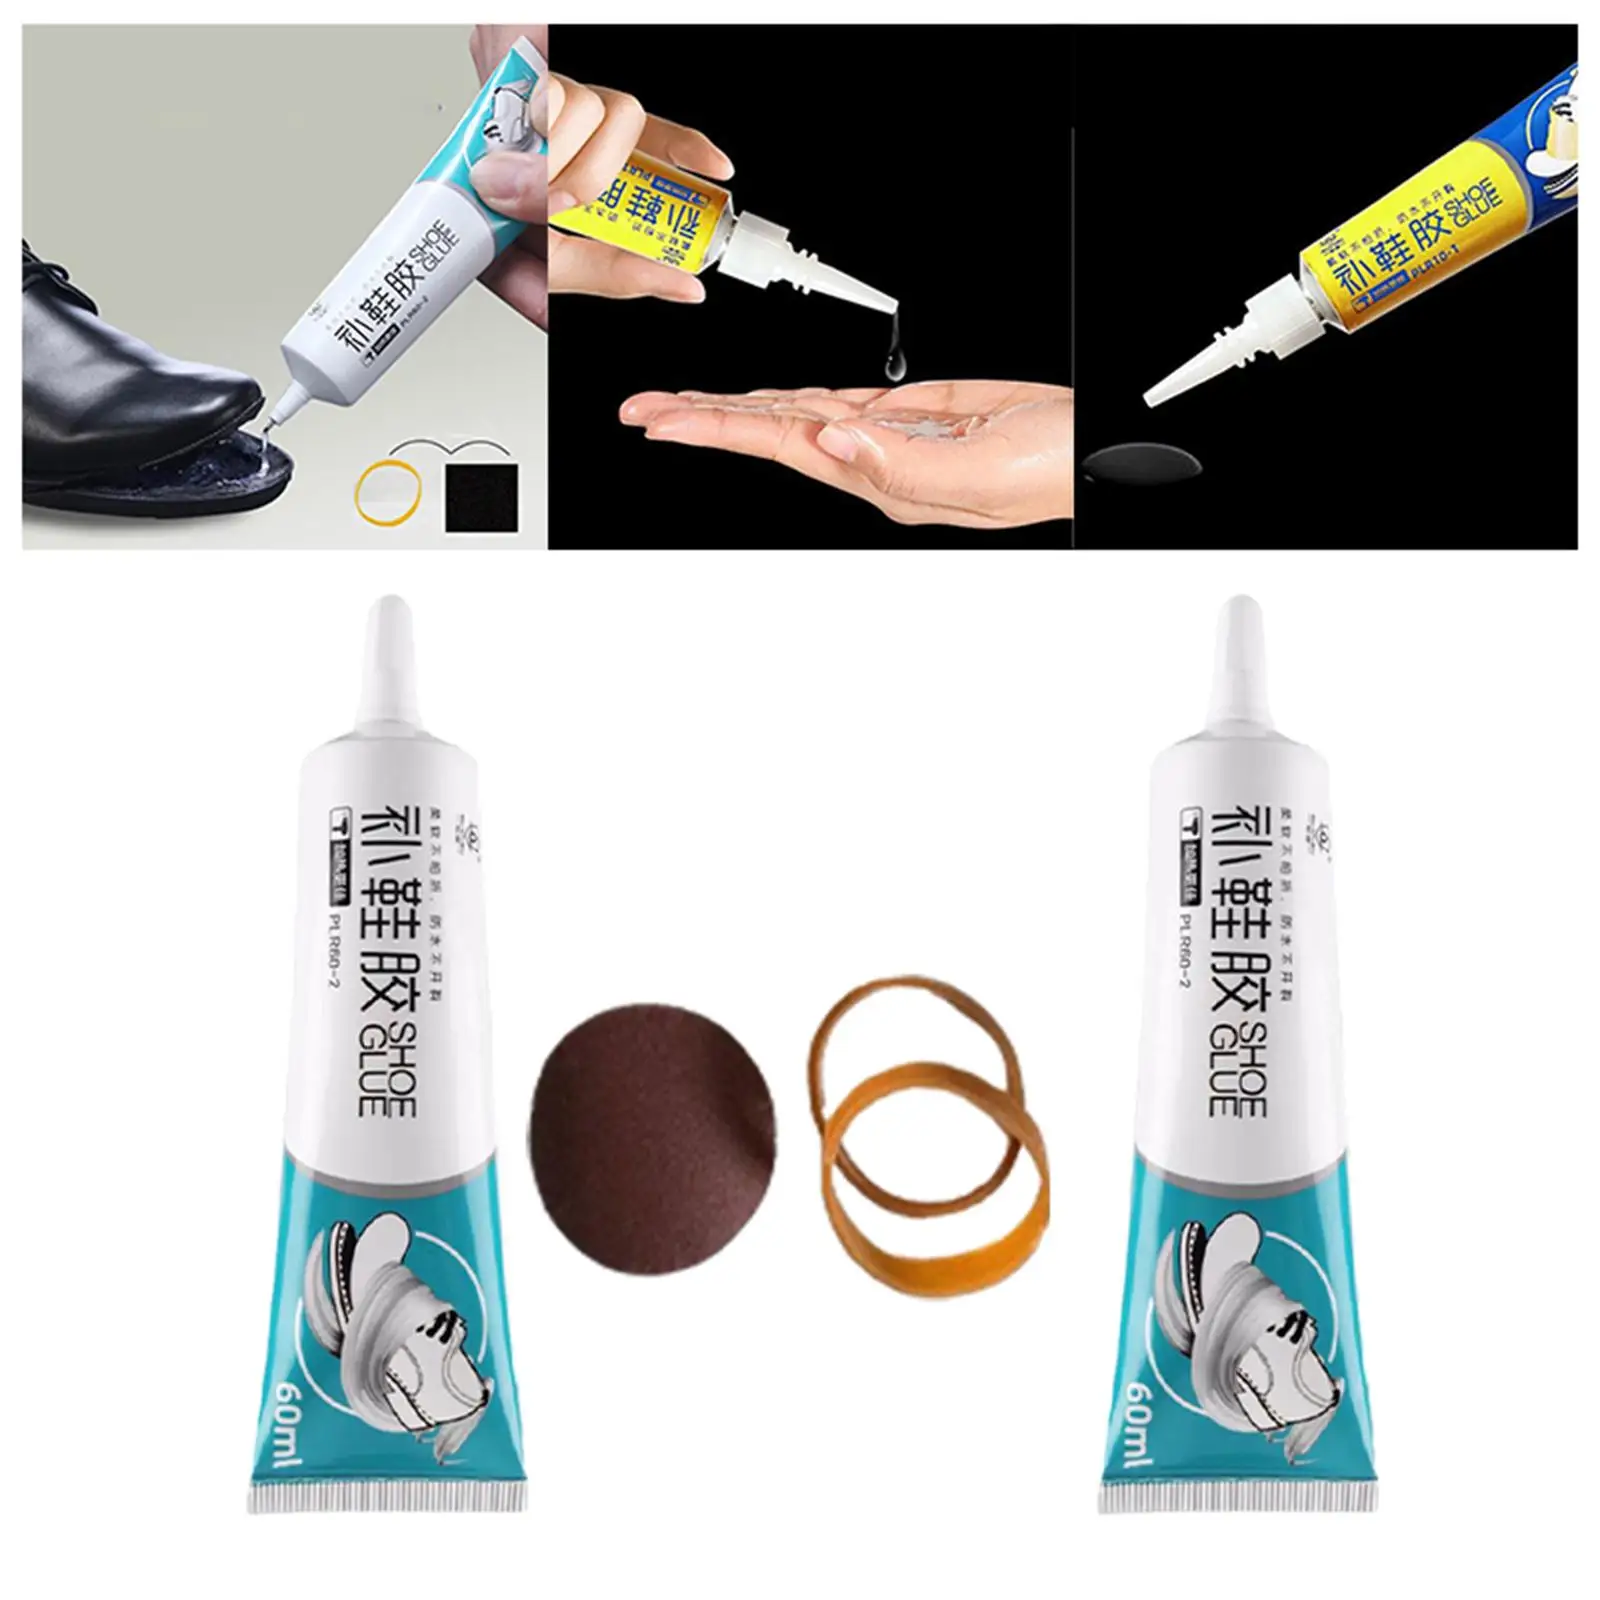 Shoe Repairing Glue Sturdy Maintenance Tool Item Repair Adhesive Glue for Neoprene Climbing Shoes Leather Running Shoes Protects